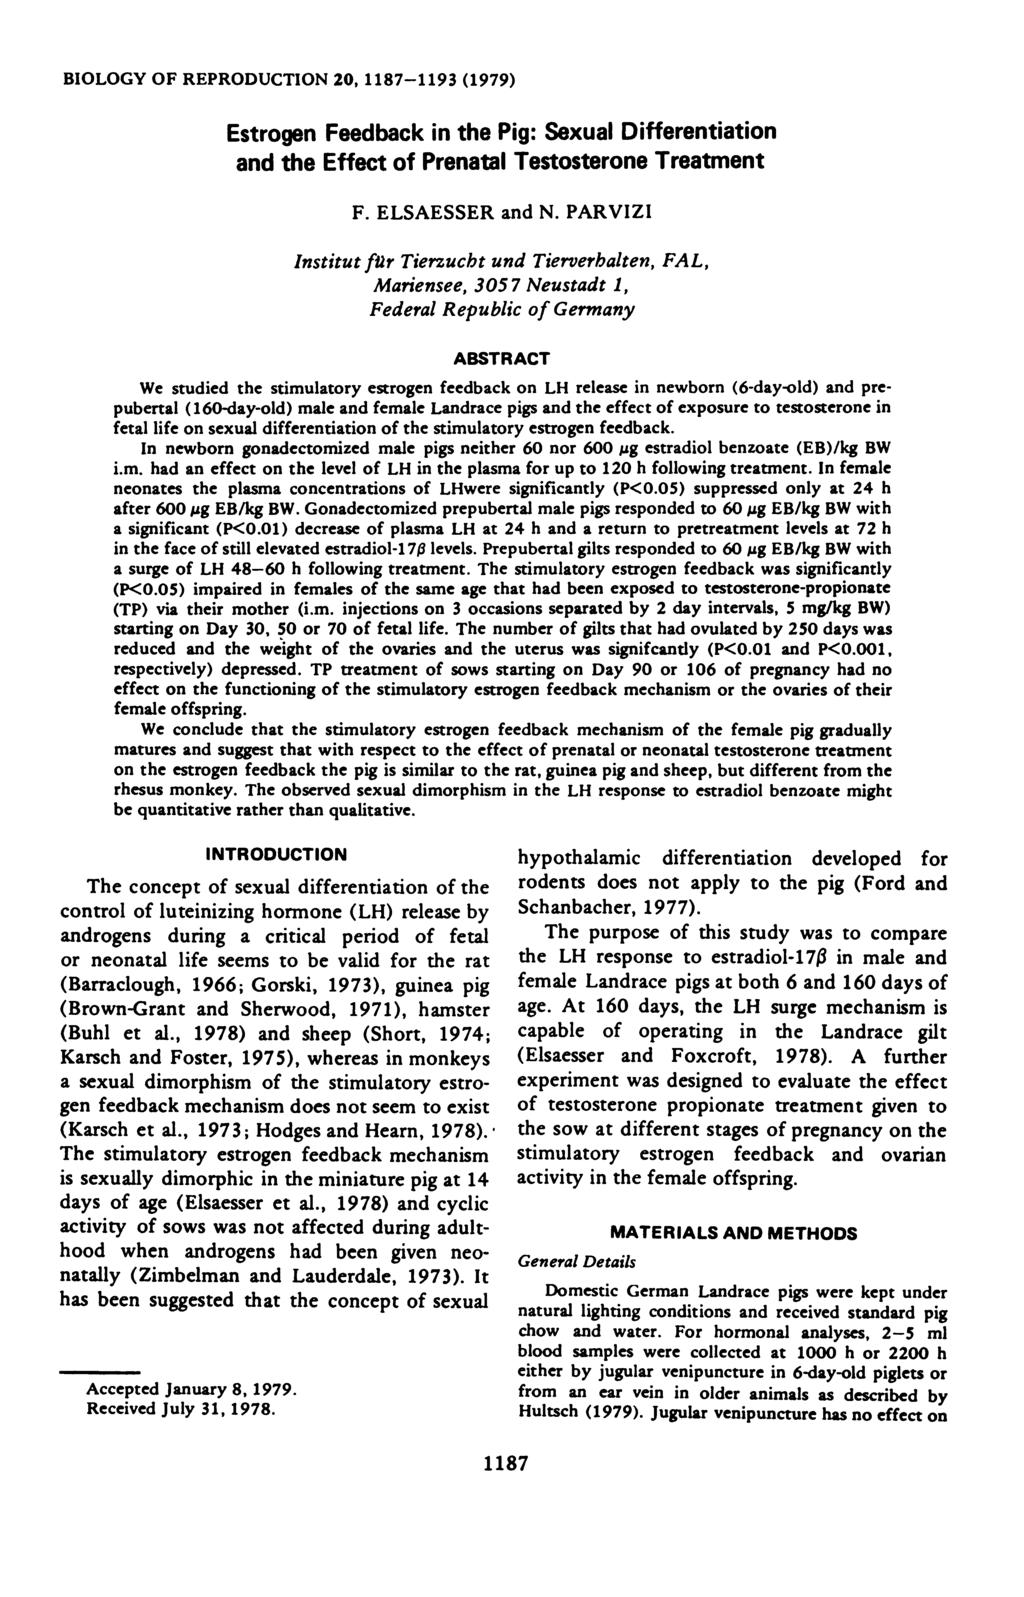 BOLOGY OF REPRODTO 2, 1187-1193 (1979) Estrogen Feedback in the Pig: Sexual Differentiation and the Effect of Prenatal Testosterone Treatment F ELSAESSER and PAR VZ institut f#{252}r Tierzucbt und